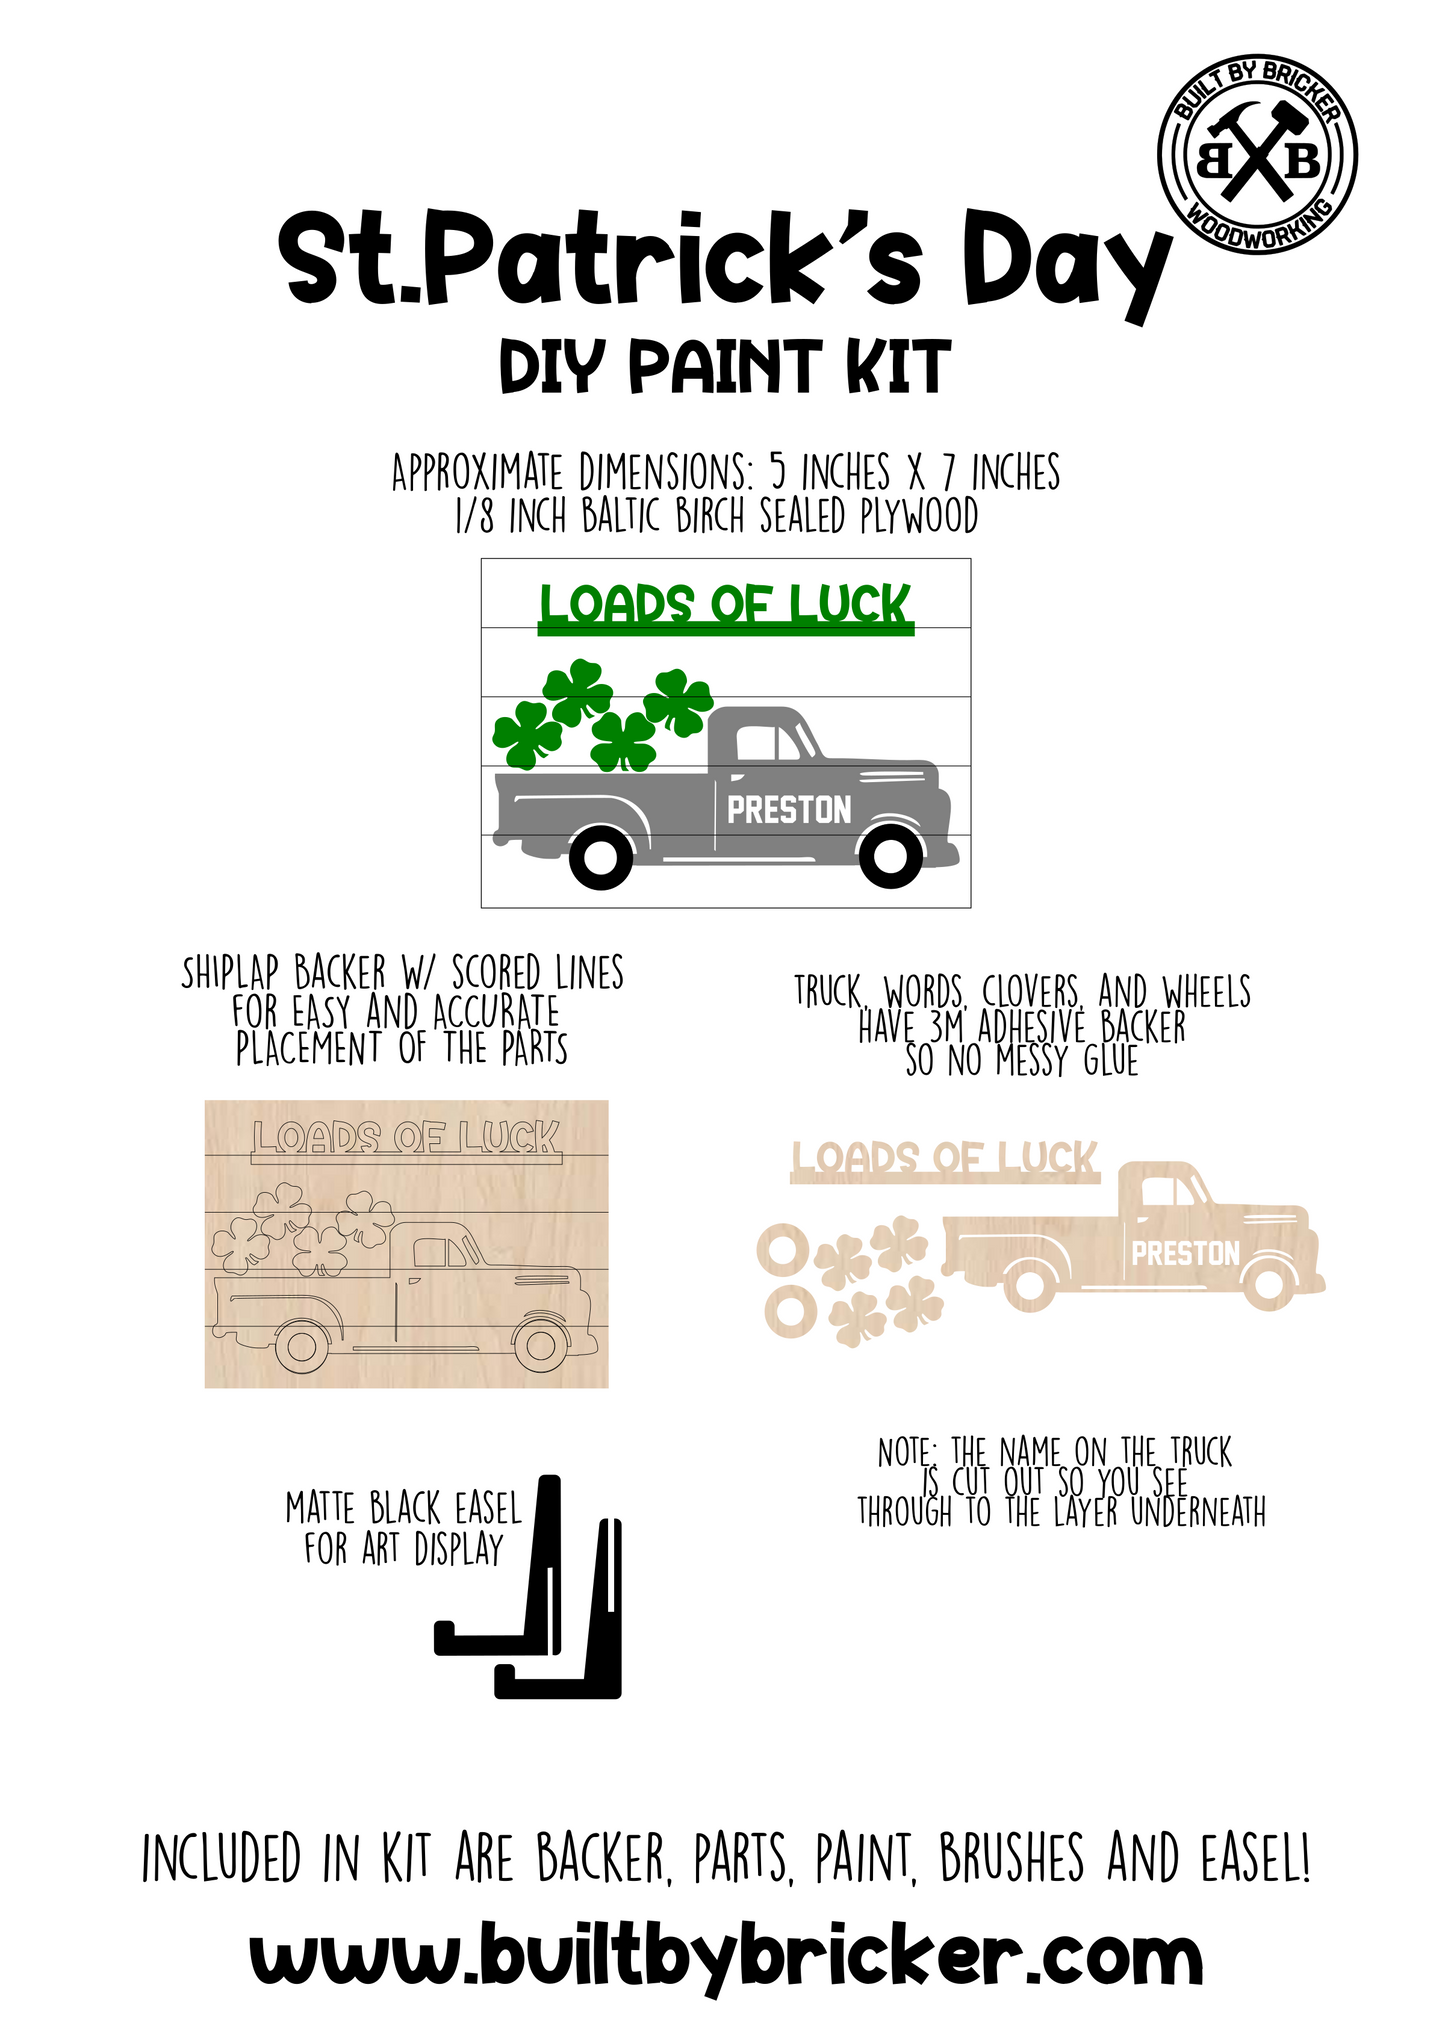 Loads of Luck Truck- St Patricks Day DIY Paint Kits